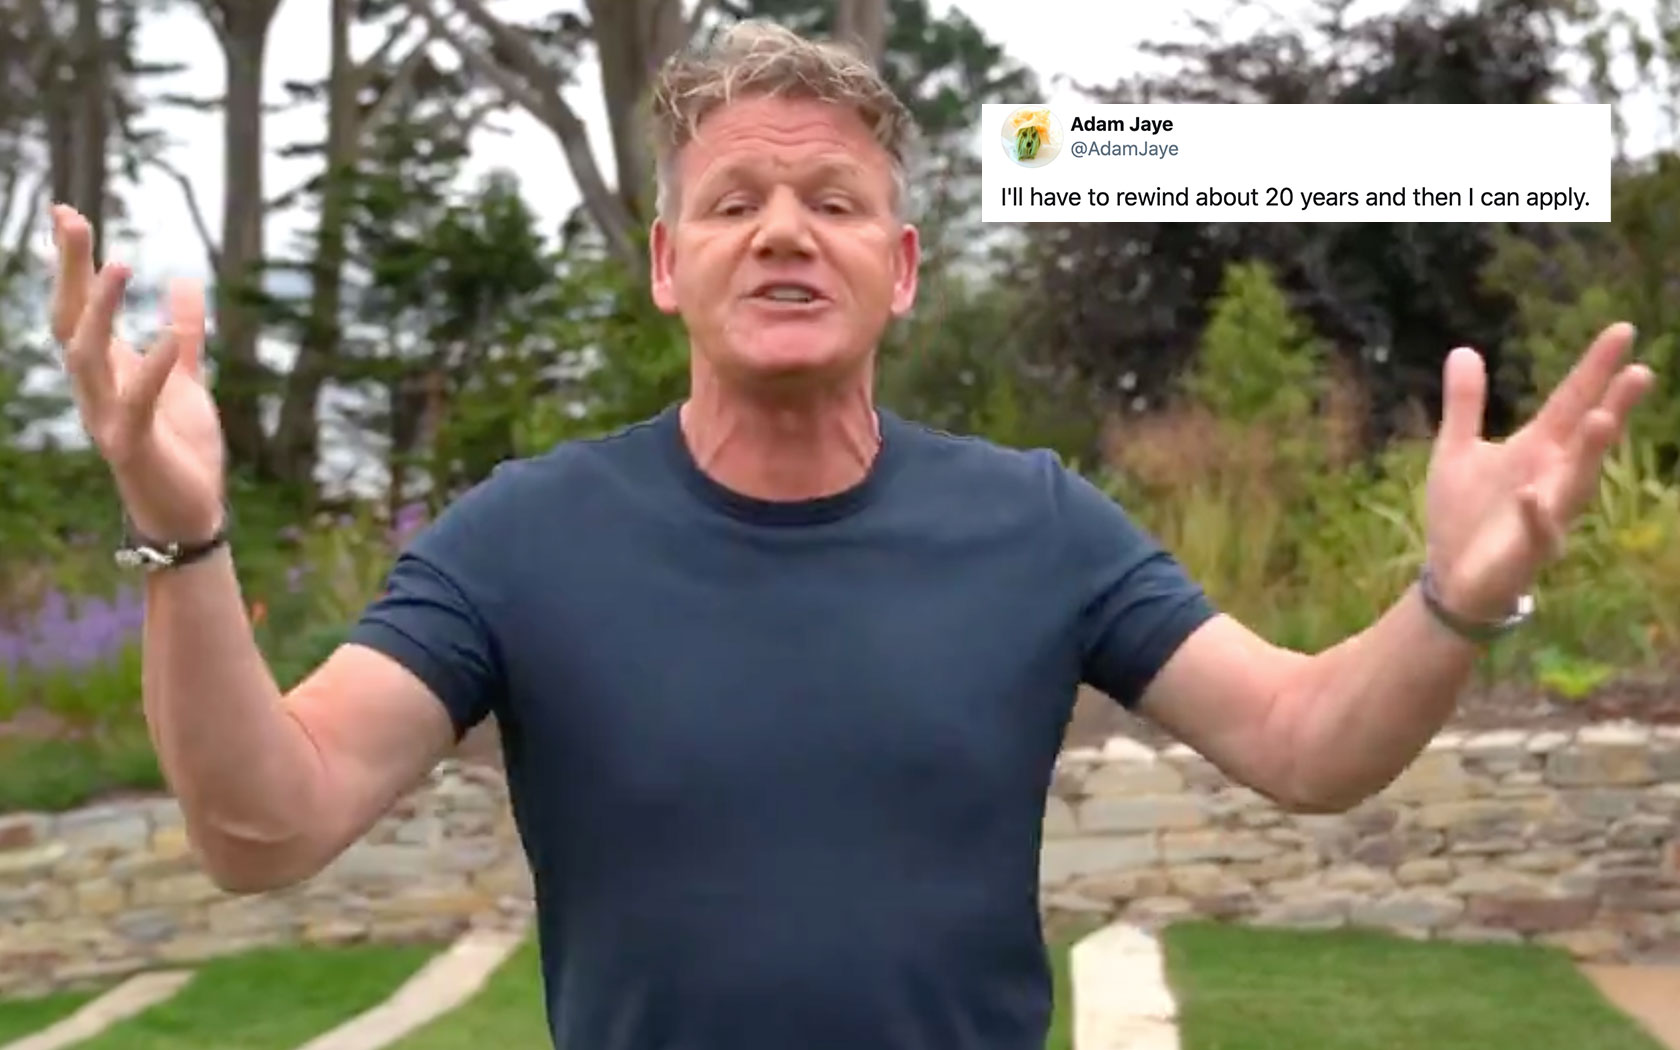 The New Gordon Ramsay Travel Show Is Looking For Contestants